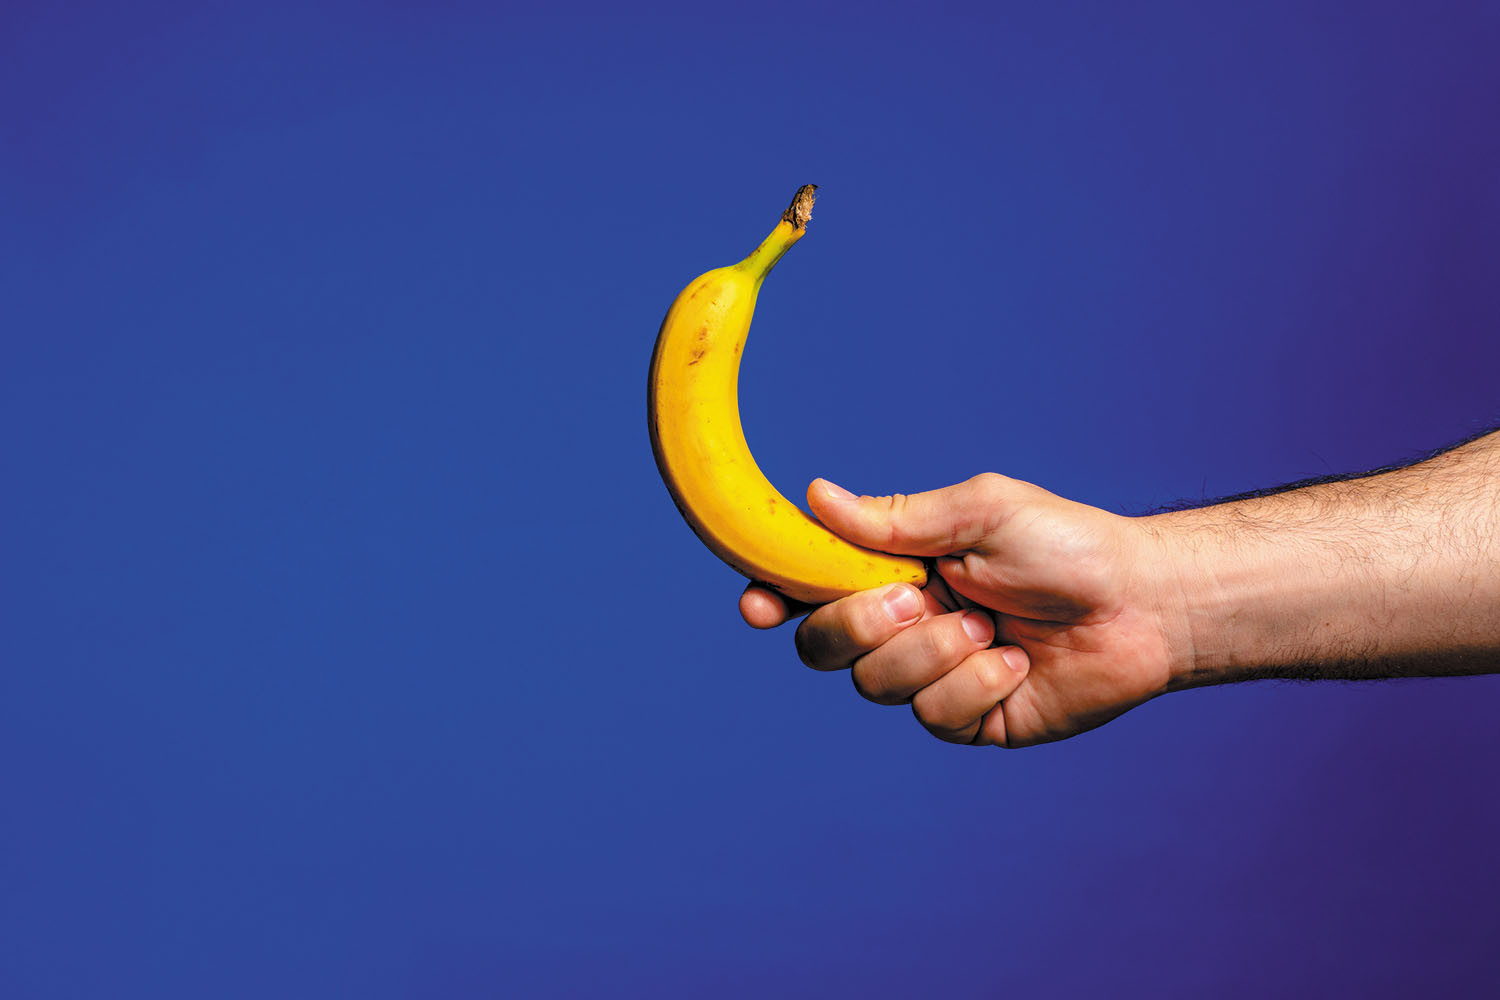 photo of a hand holding a banana against a dark blue background